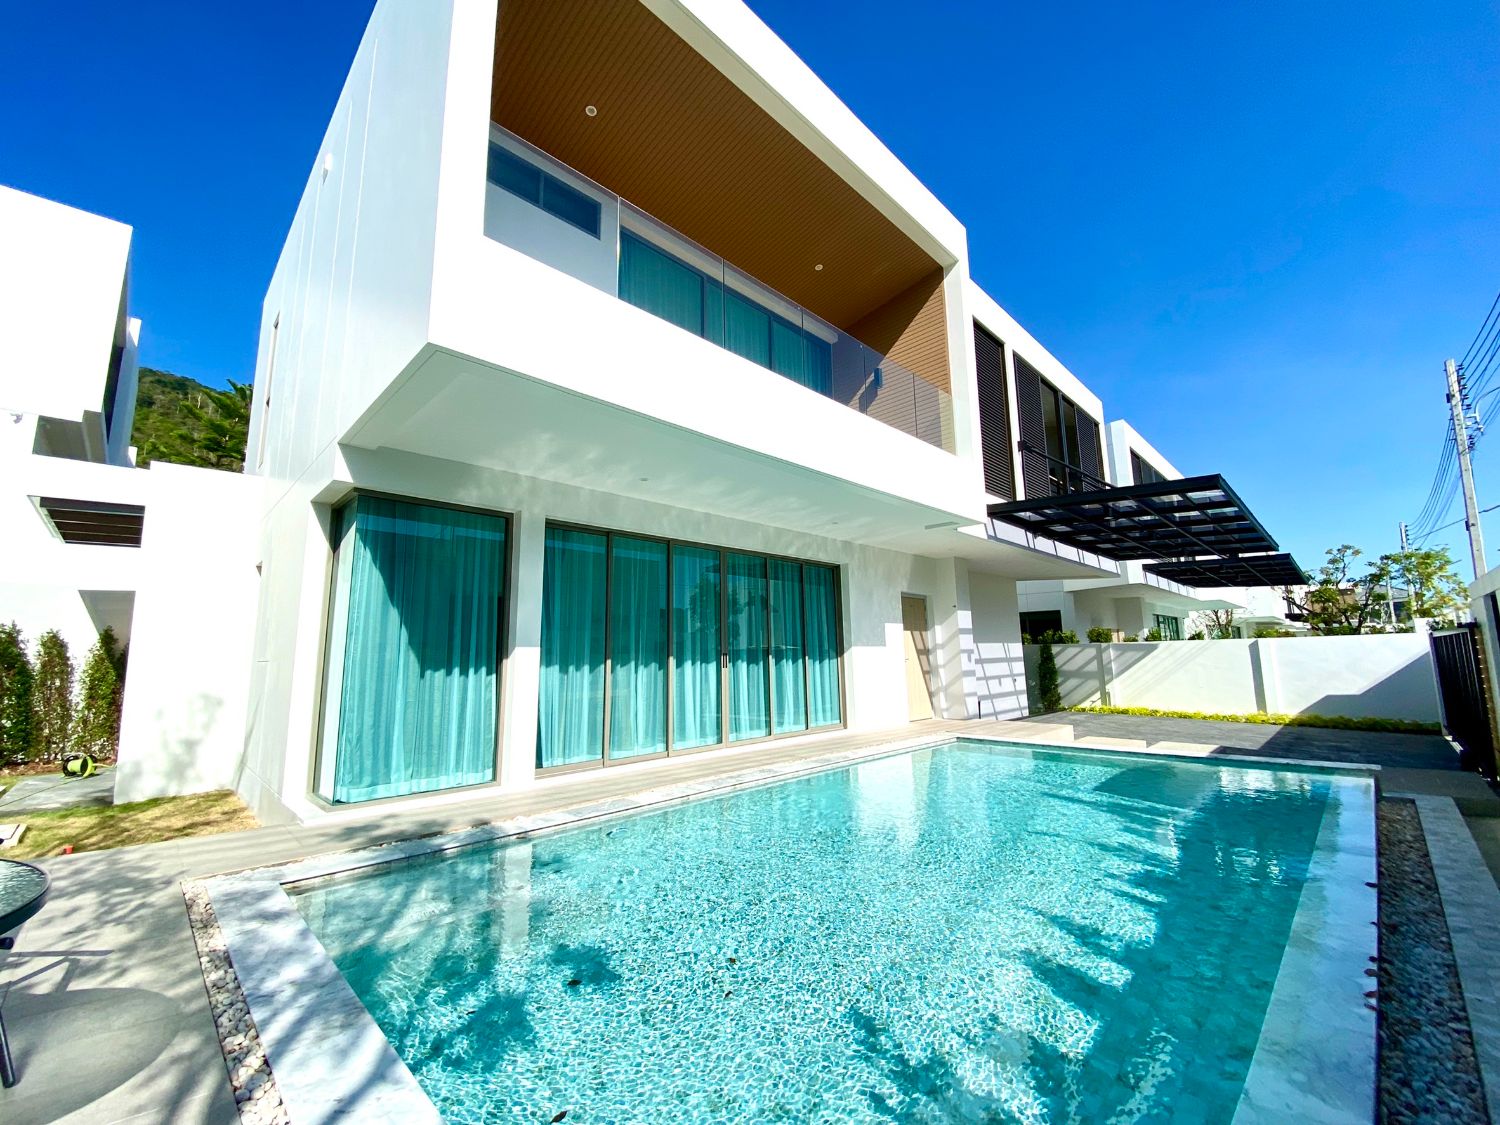 💥SPECIAL PRICE!!💥 New Private Pool Villa for Rent in Town,   (VR65-PK0357)(VS17-PK0197) ⚡️65,000 Baht / Month for 1 year contract⚡️